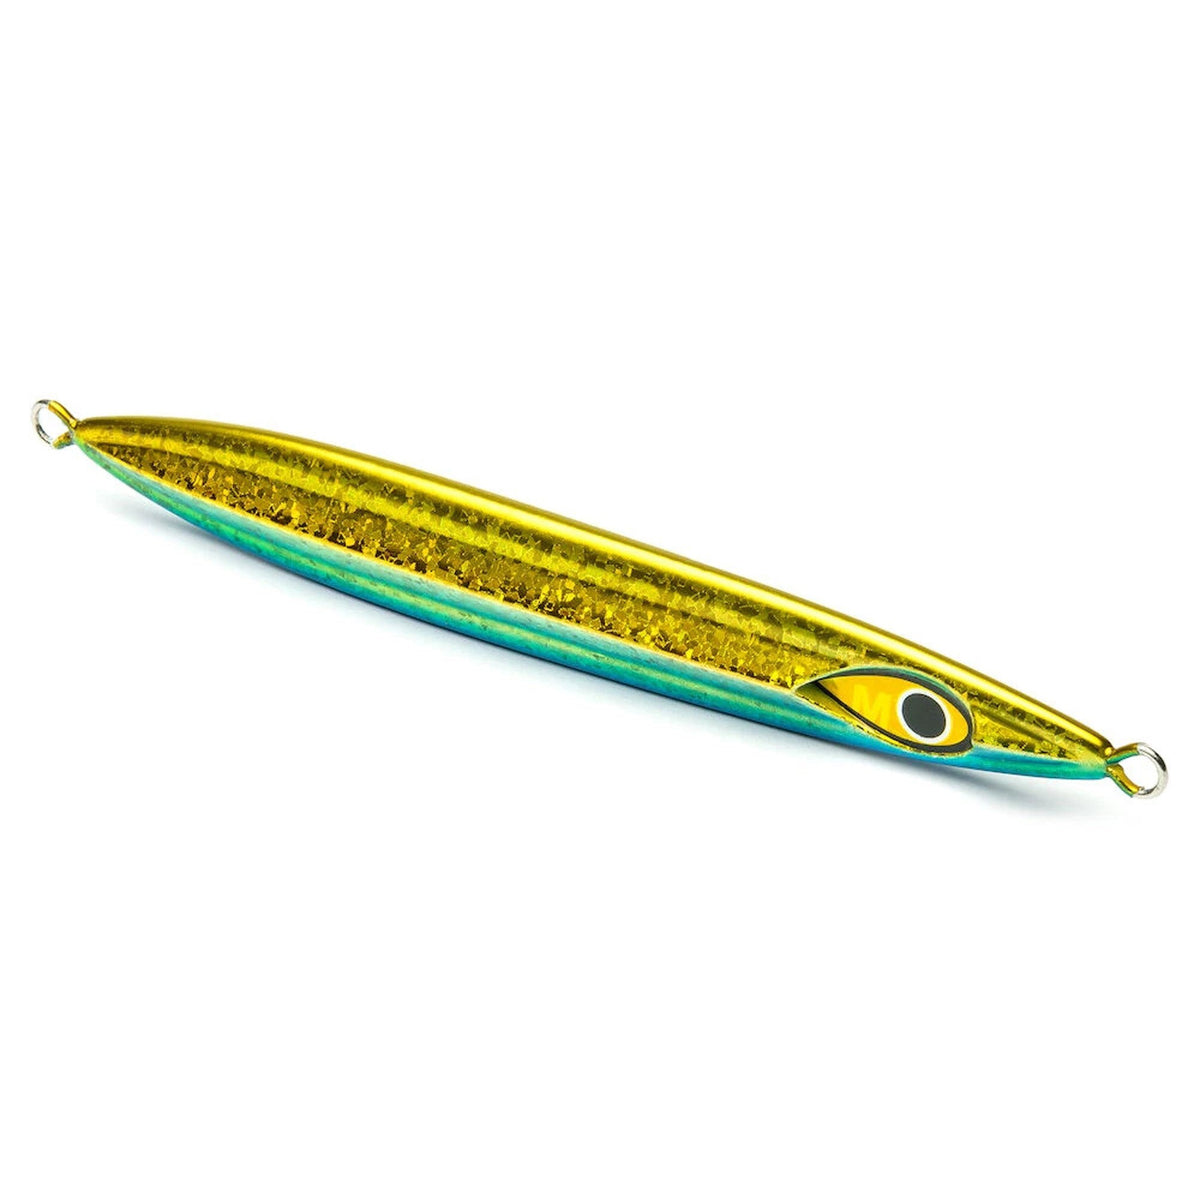 Mustad Rip Roller Slow Fall Jig With Assist Hook